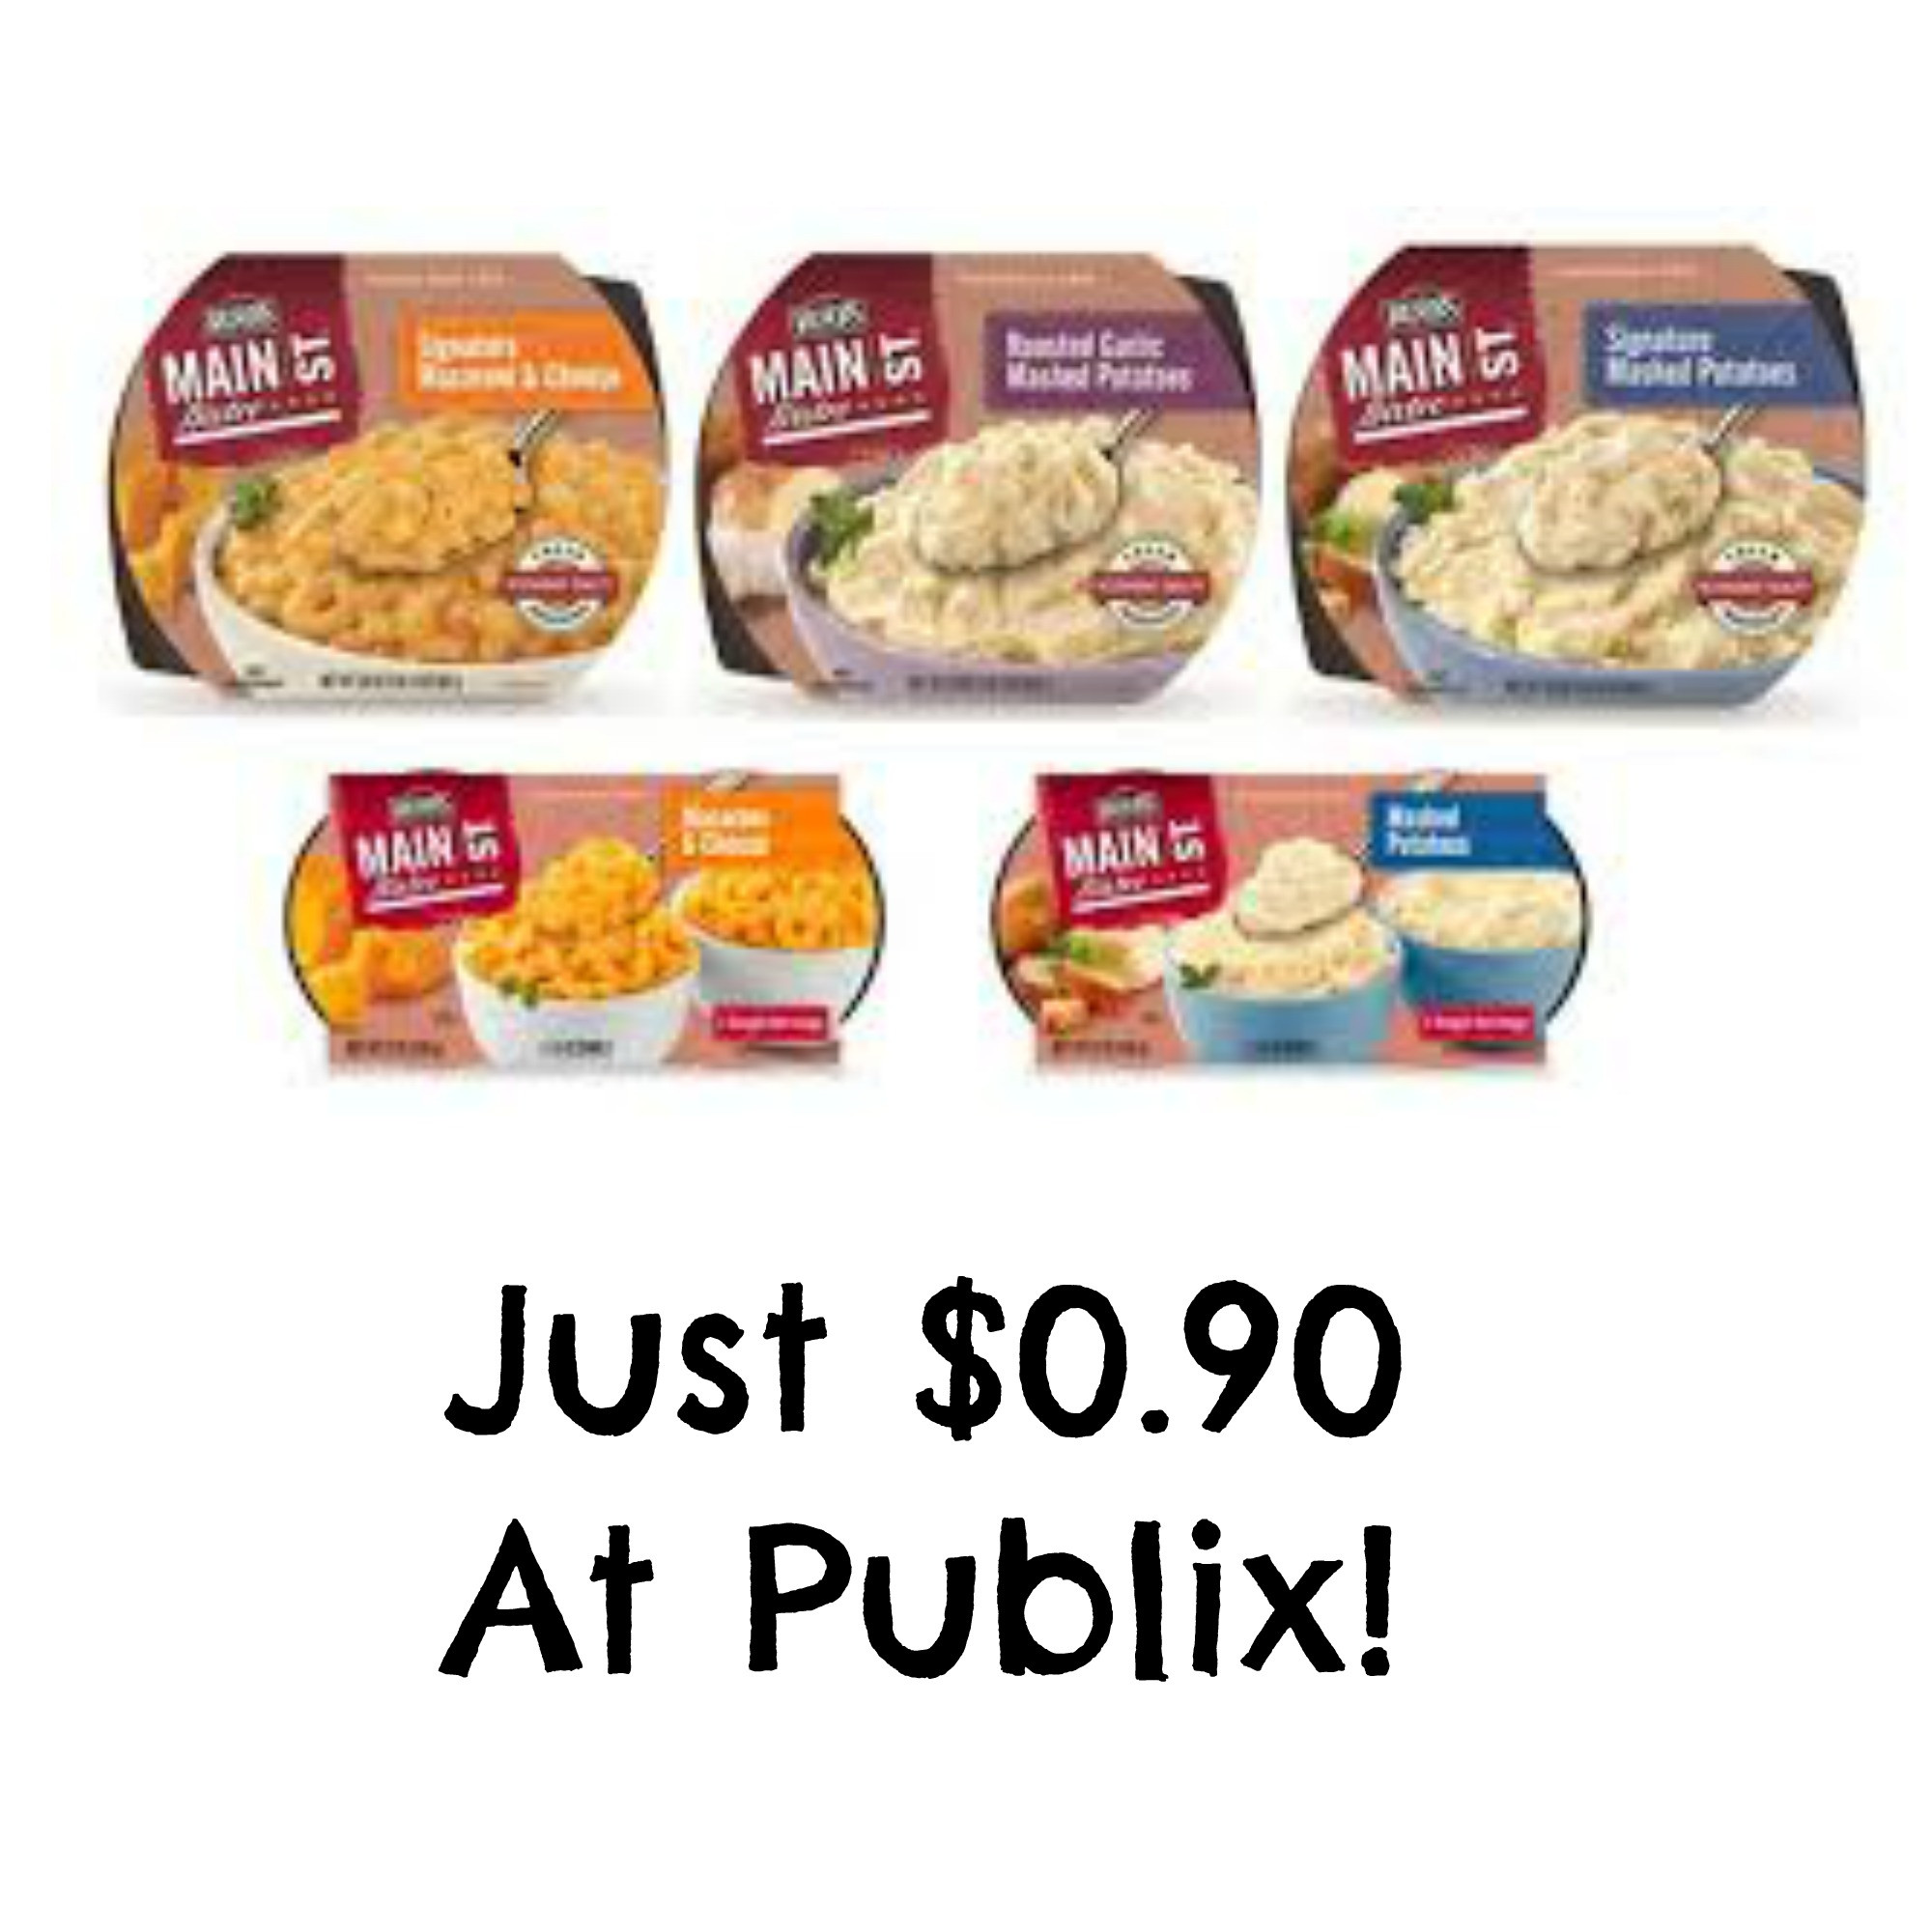 Publix Thanksgiving Dinners
 Reser’s Side Dishes Just $0 90 At Publix